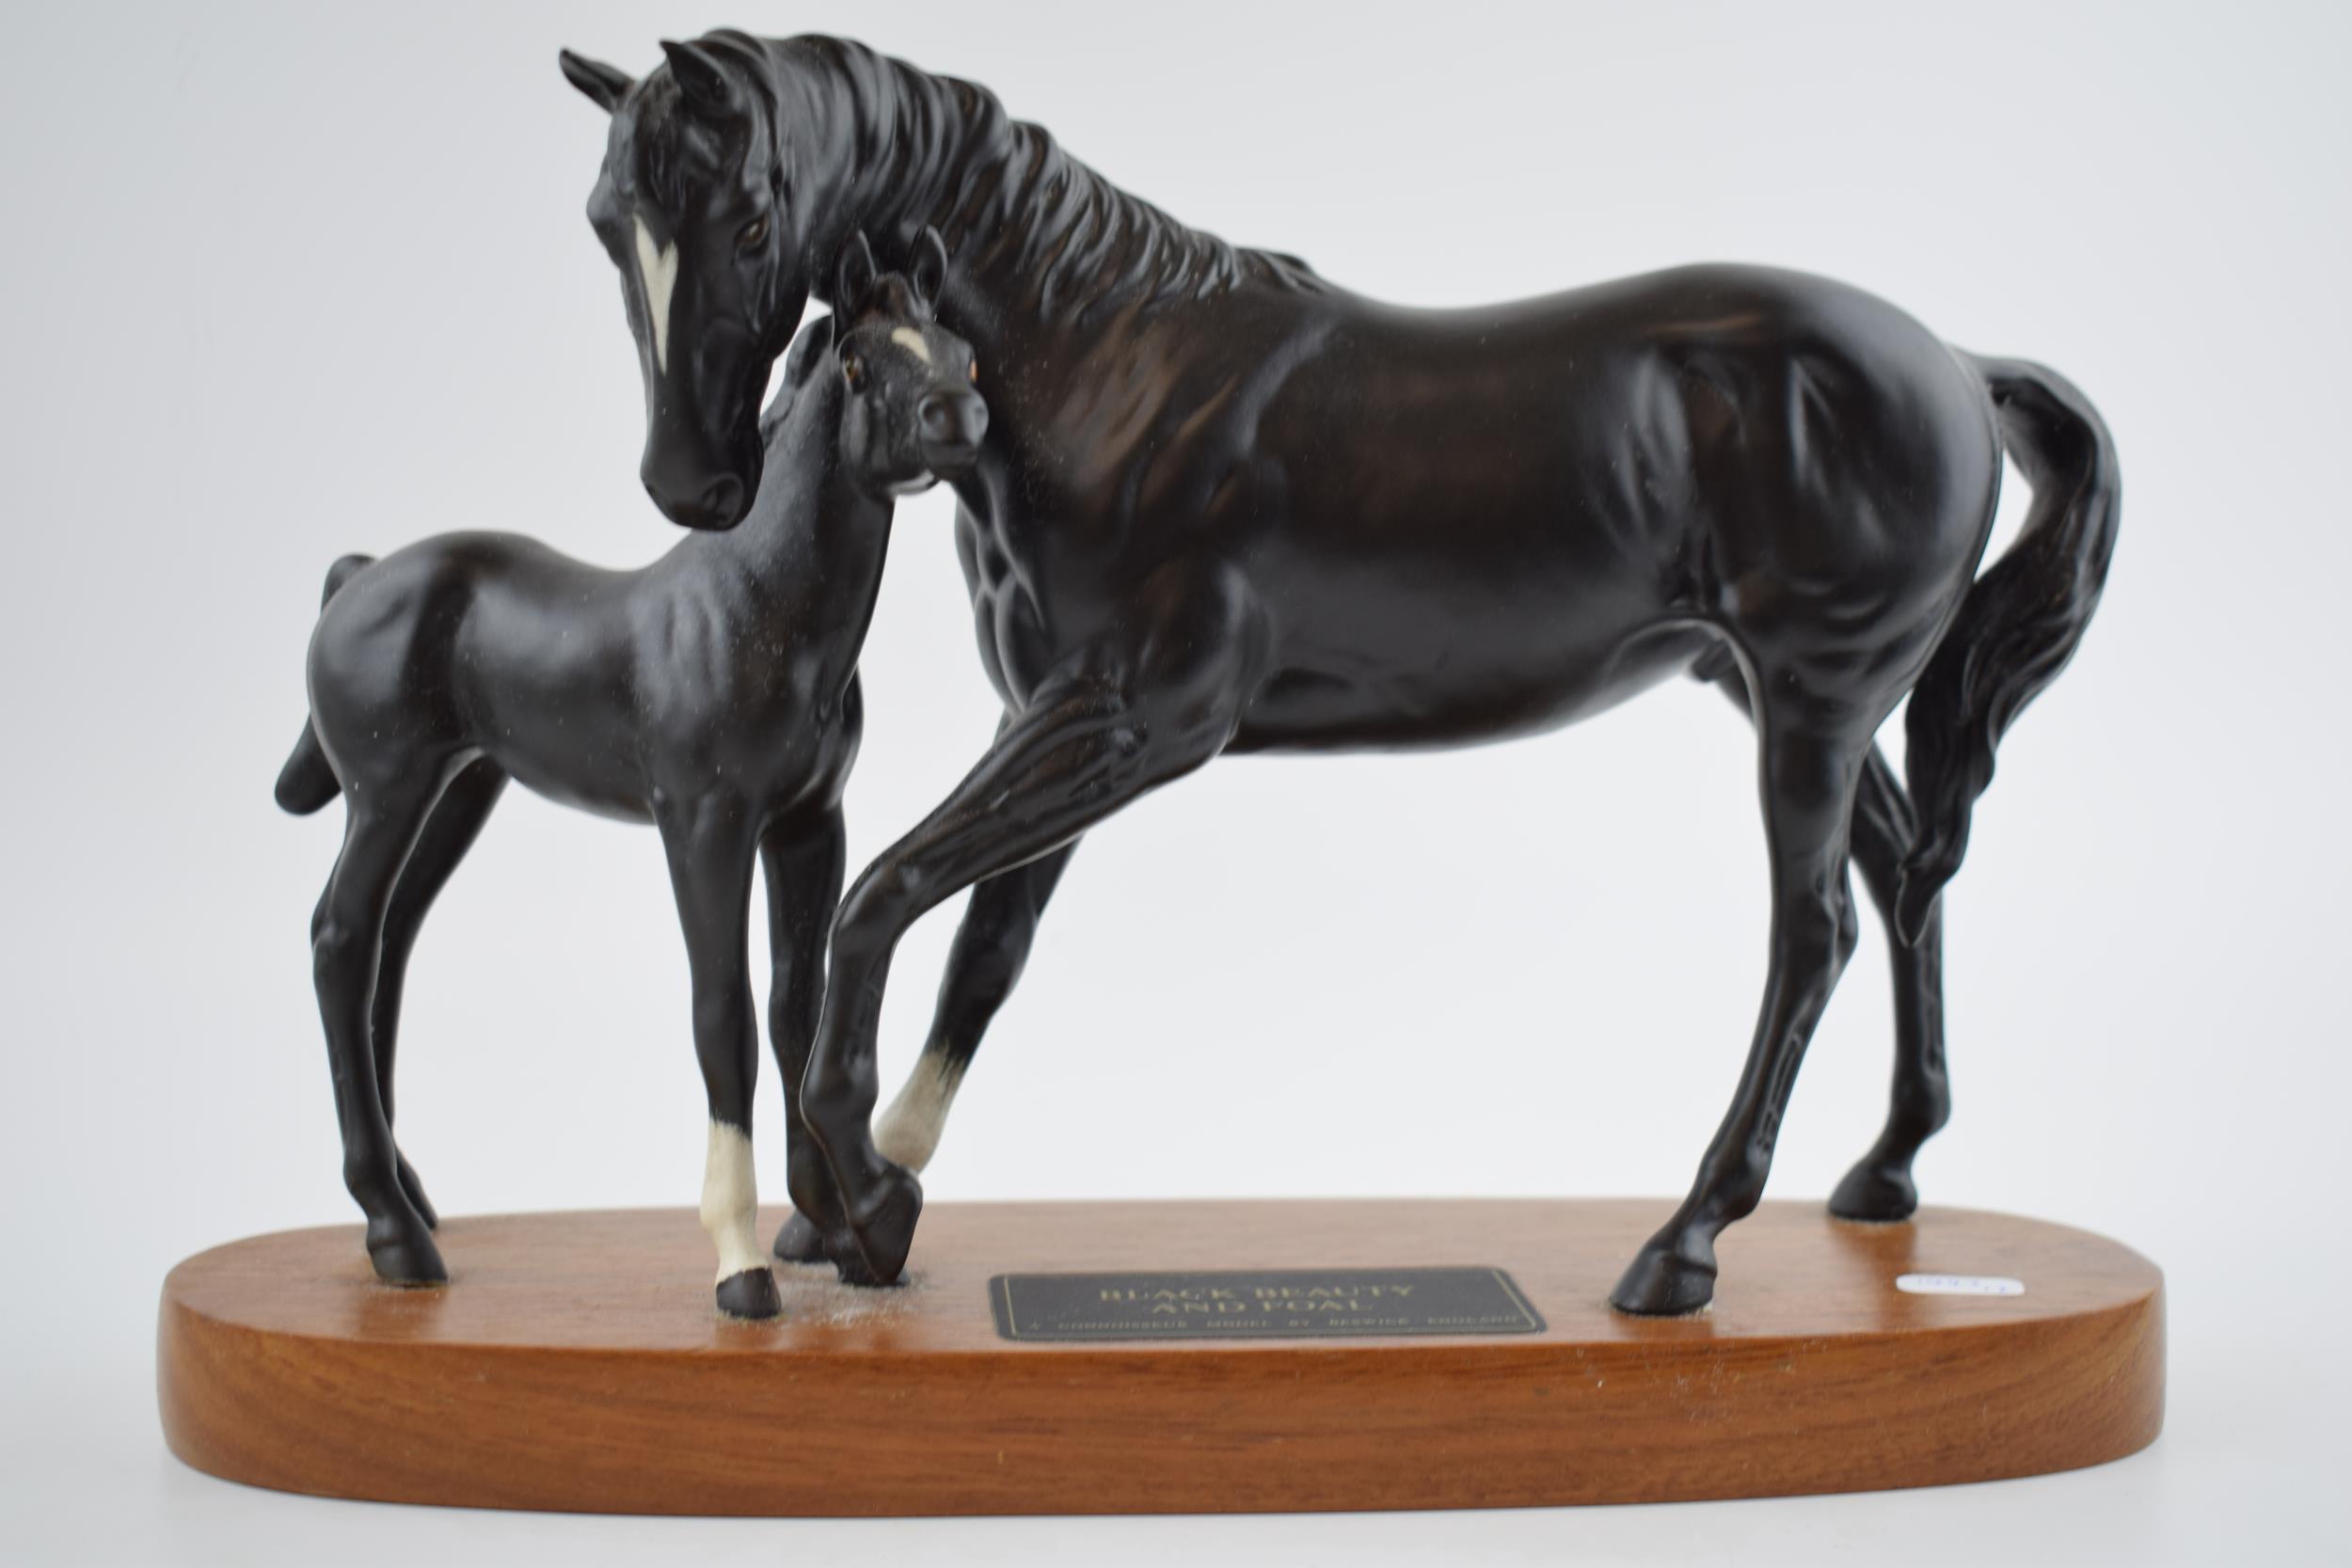 Beswick Black Beauty and Foal on wooden base. In good condition with no obvious damage or